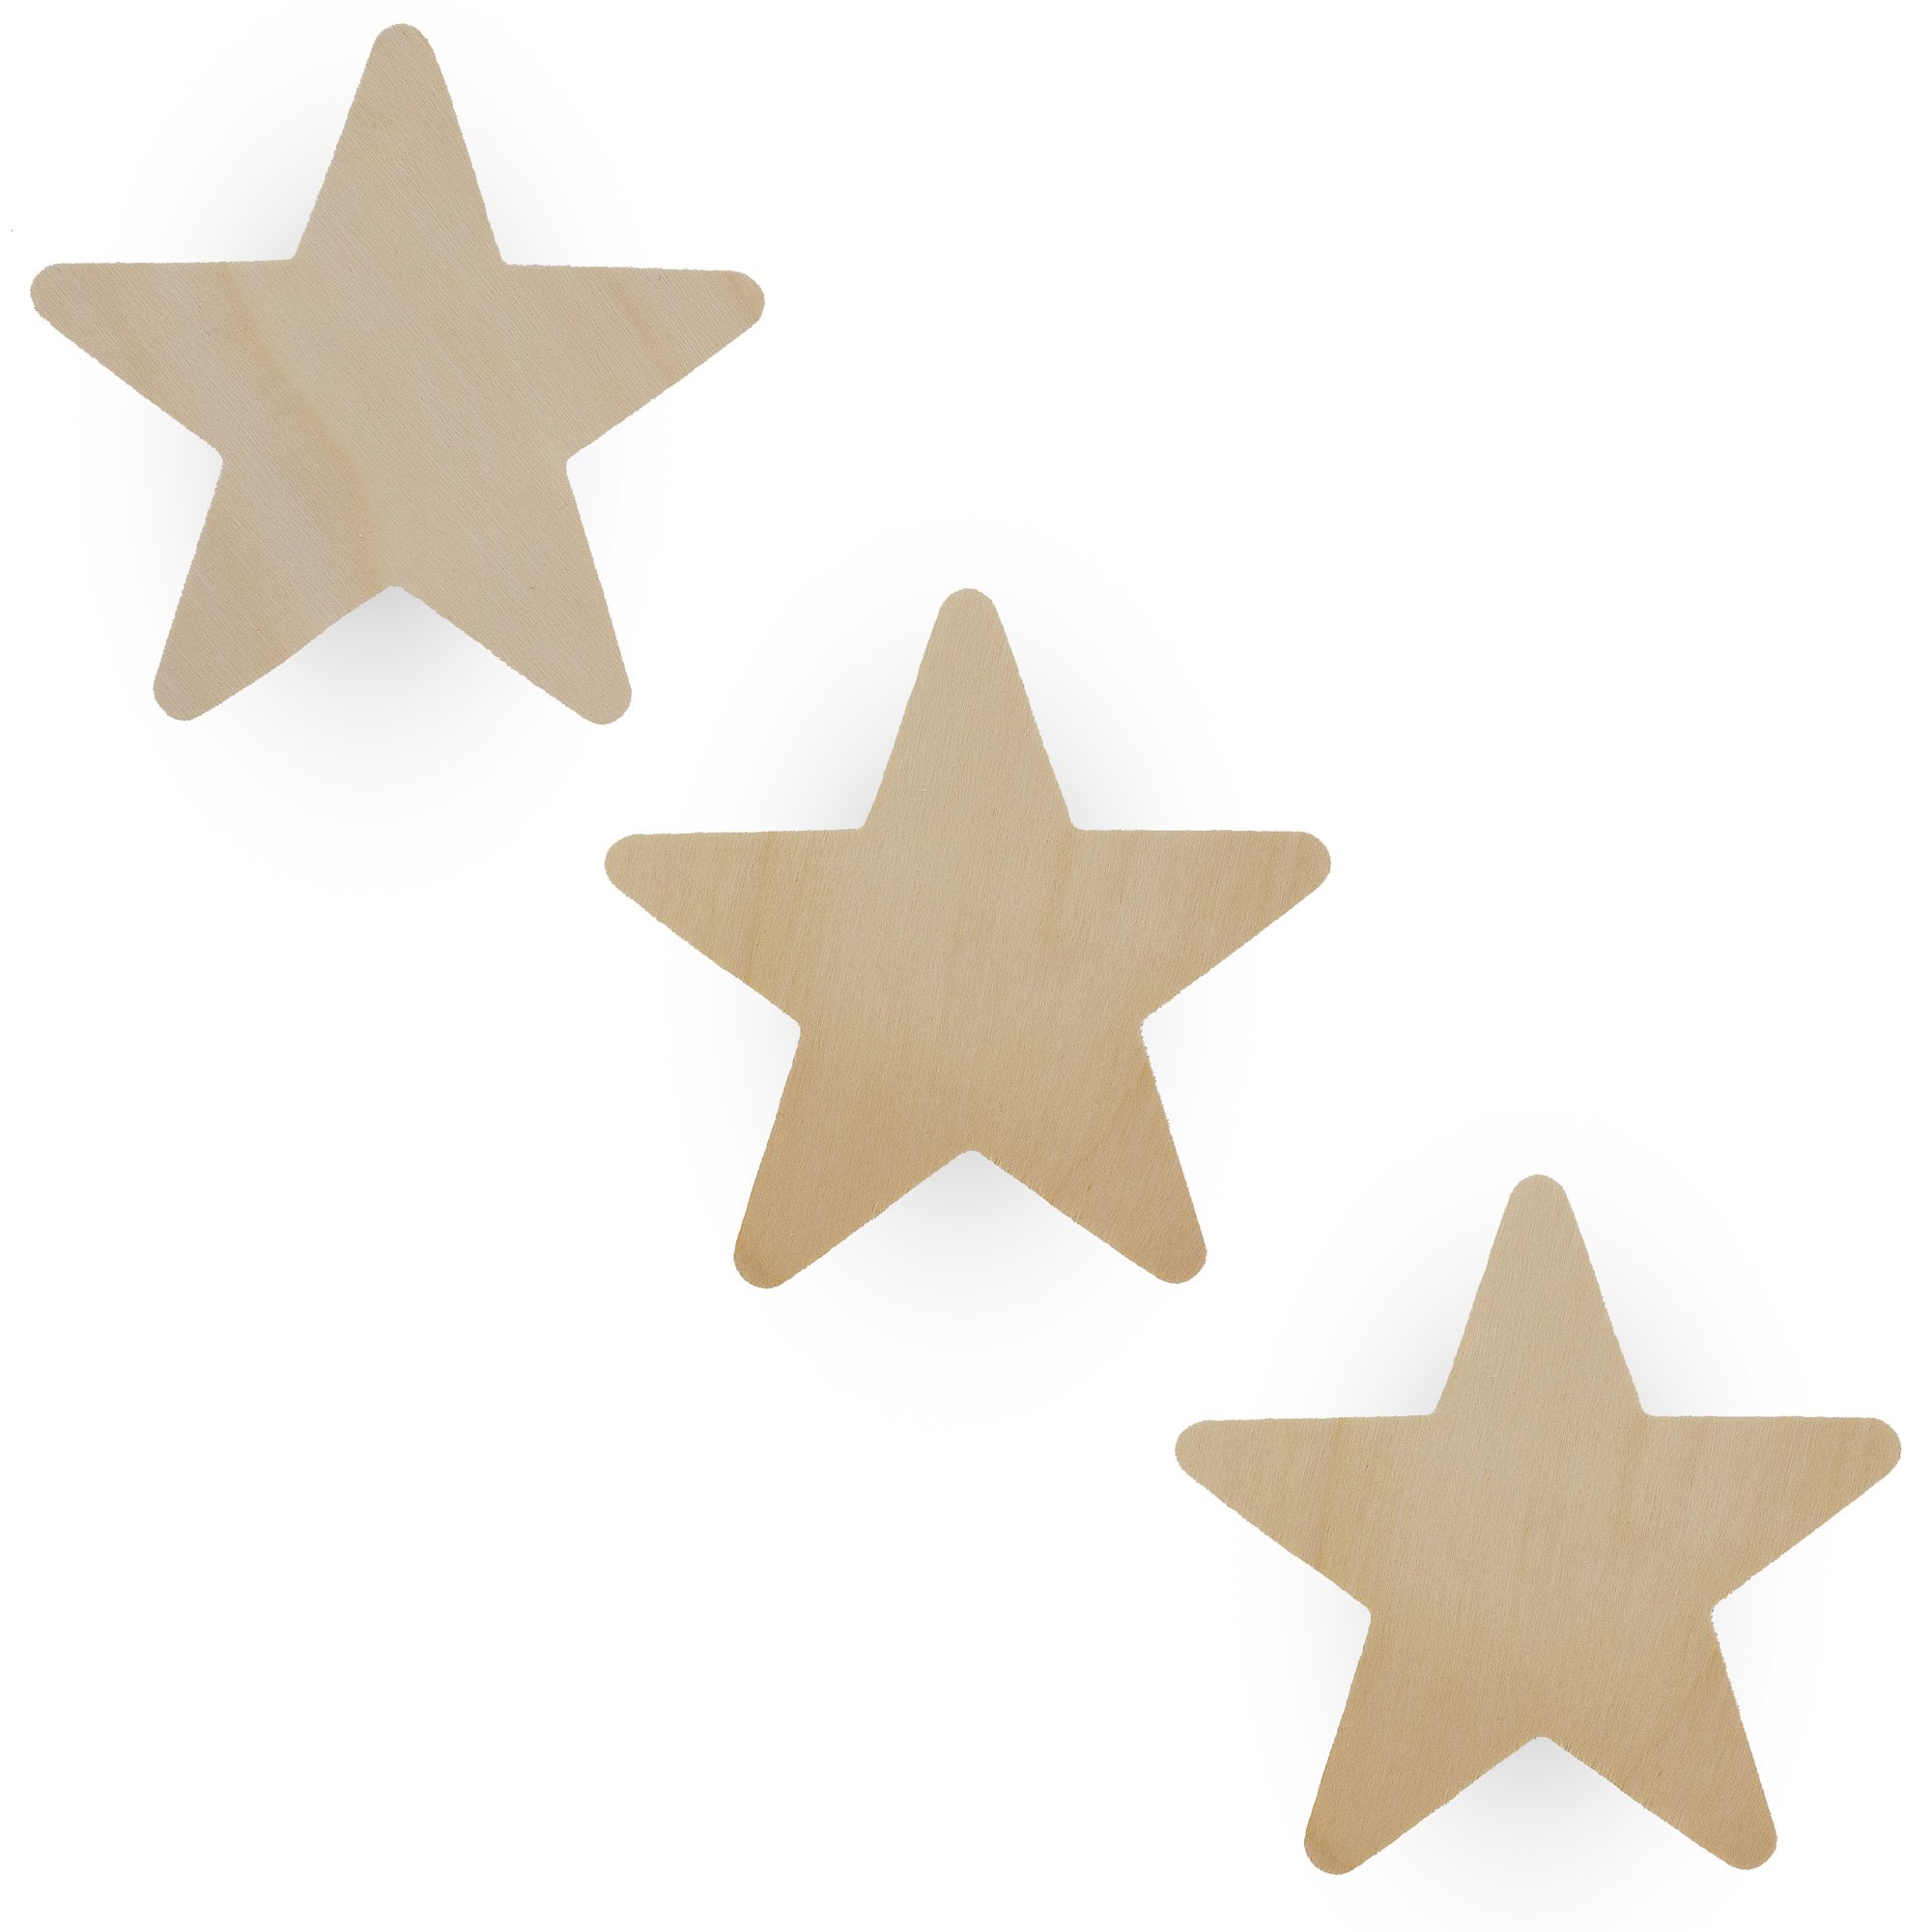 3 Unfinished Wooden Star Shapes Cutouts DIY Crafts 3.9 Inches - image 1 of 2